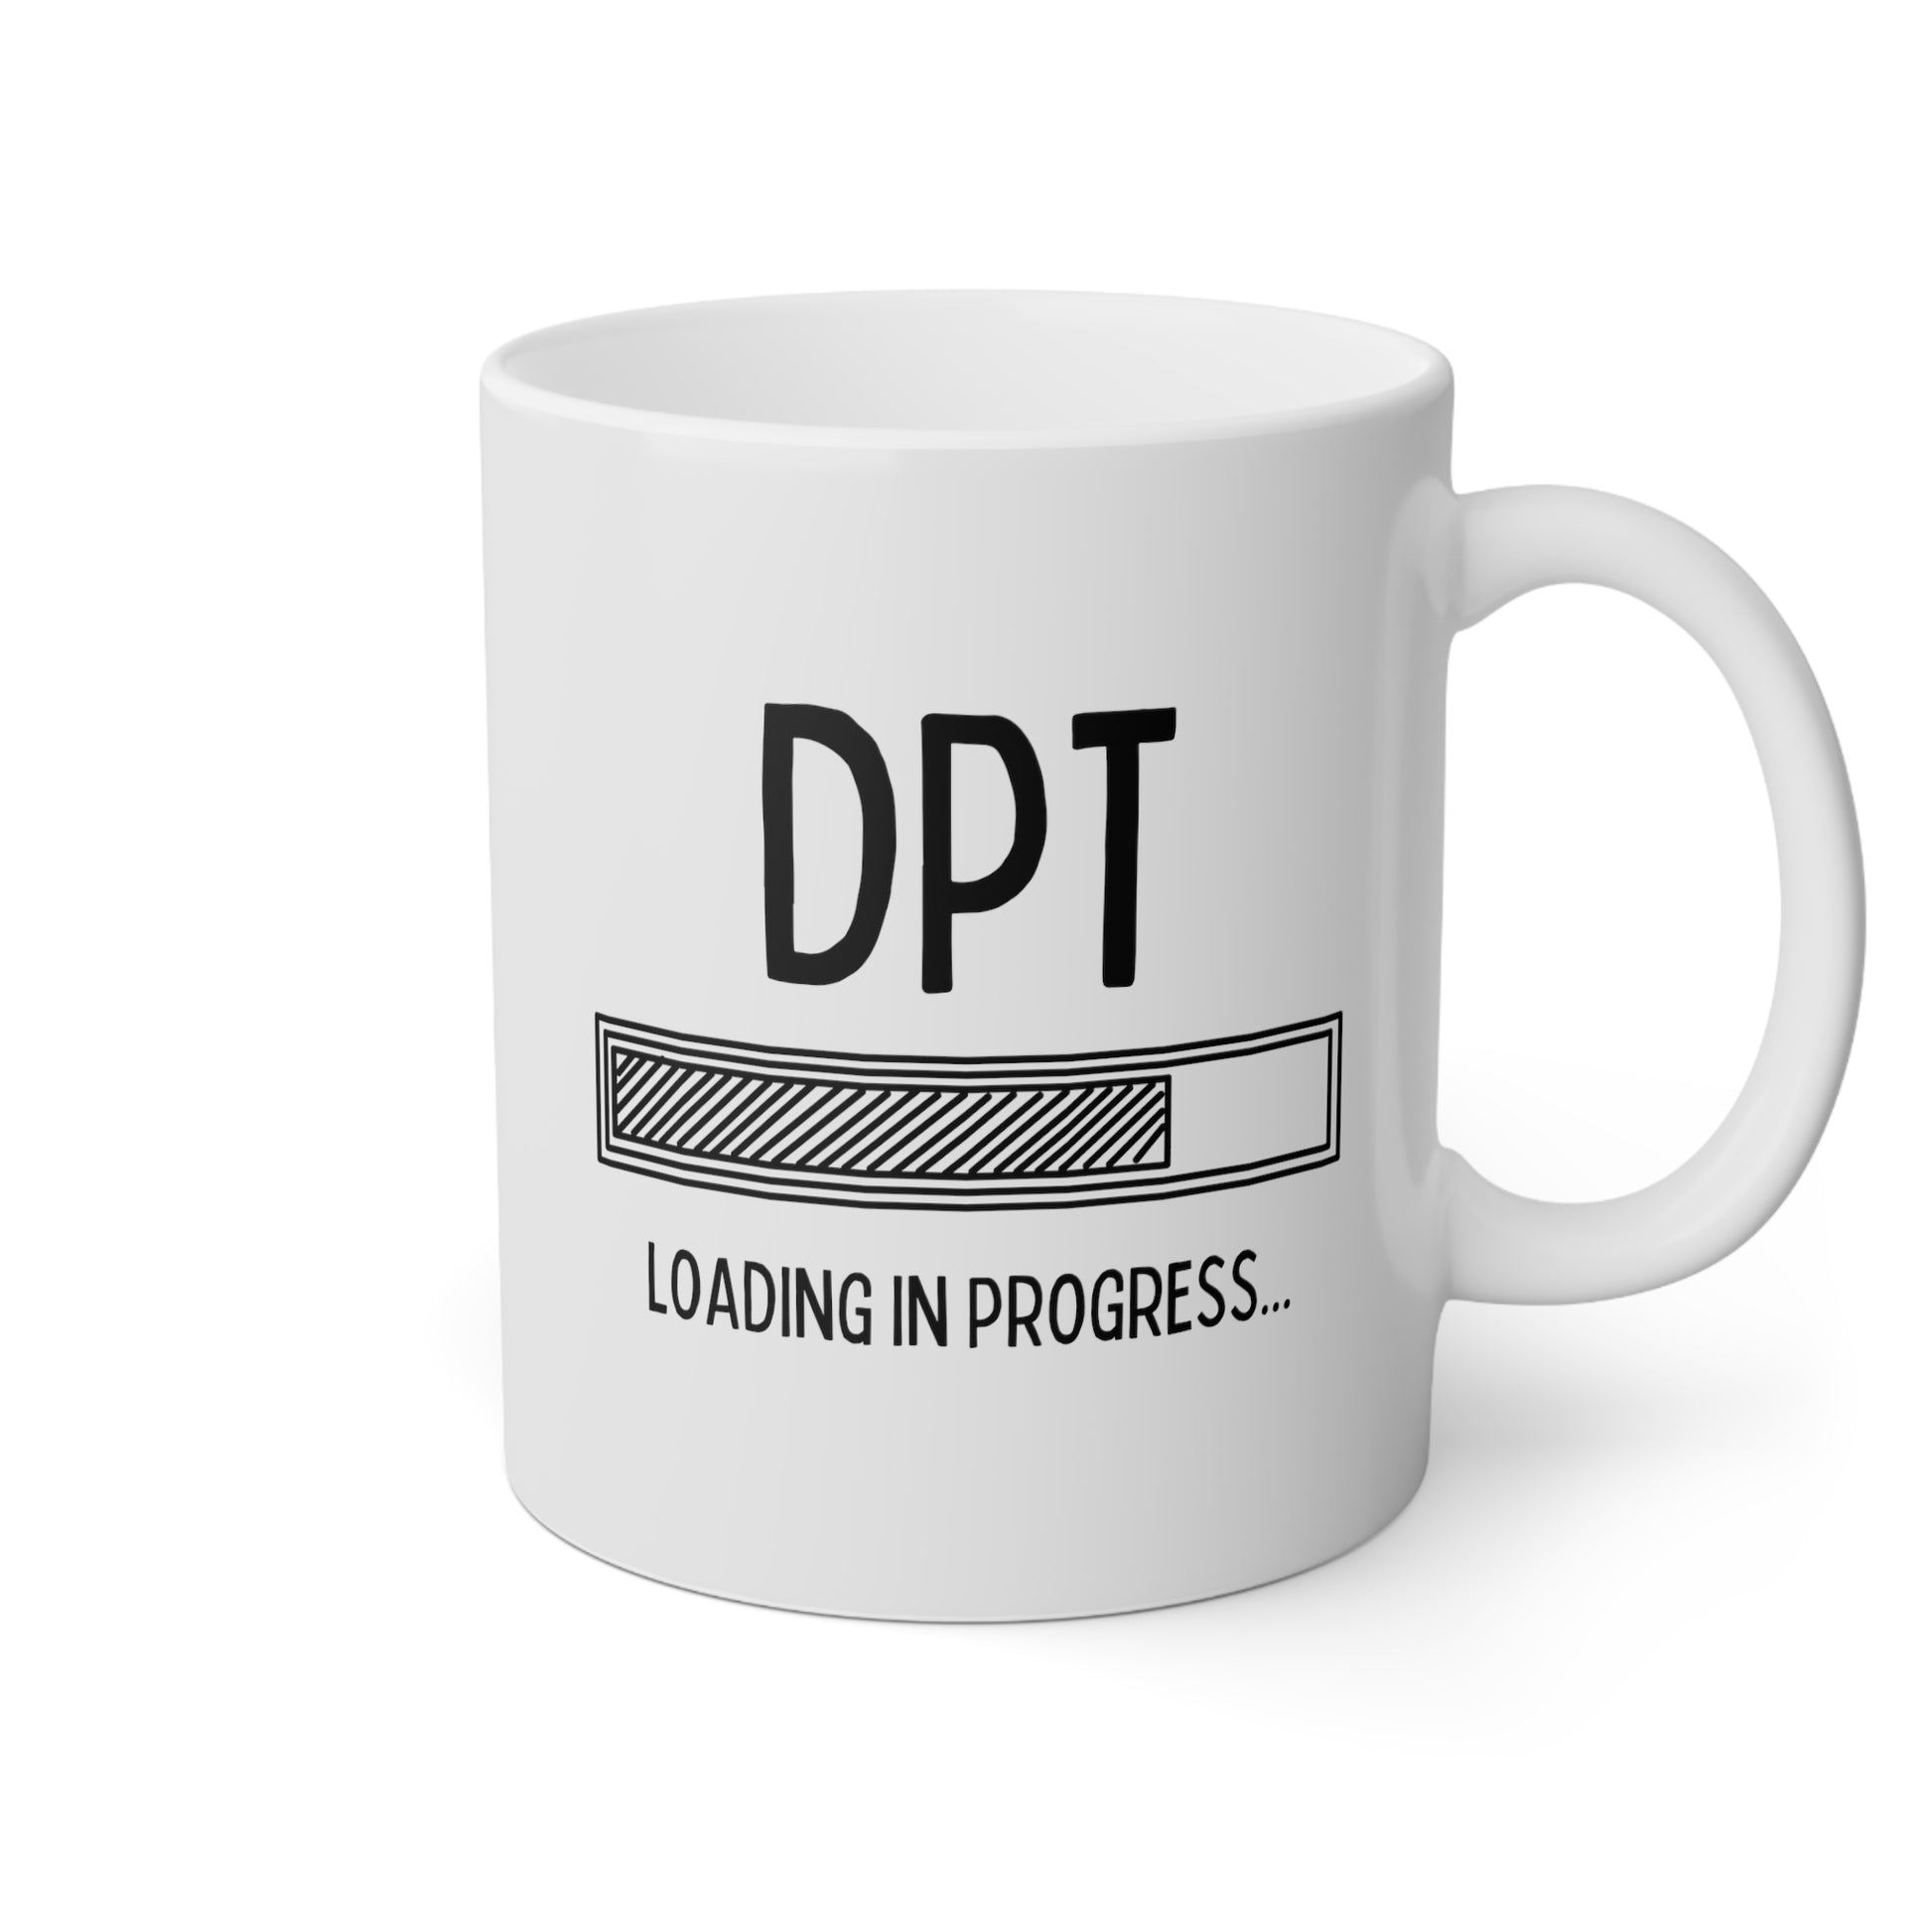 DPT Loading in Progress 11oz white funny large coffee mug gift for doctor of physical therapy student graduation Dr medicine waveywares wavey wares wavywares wavy wares